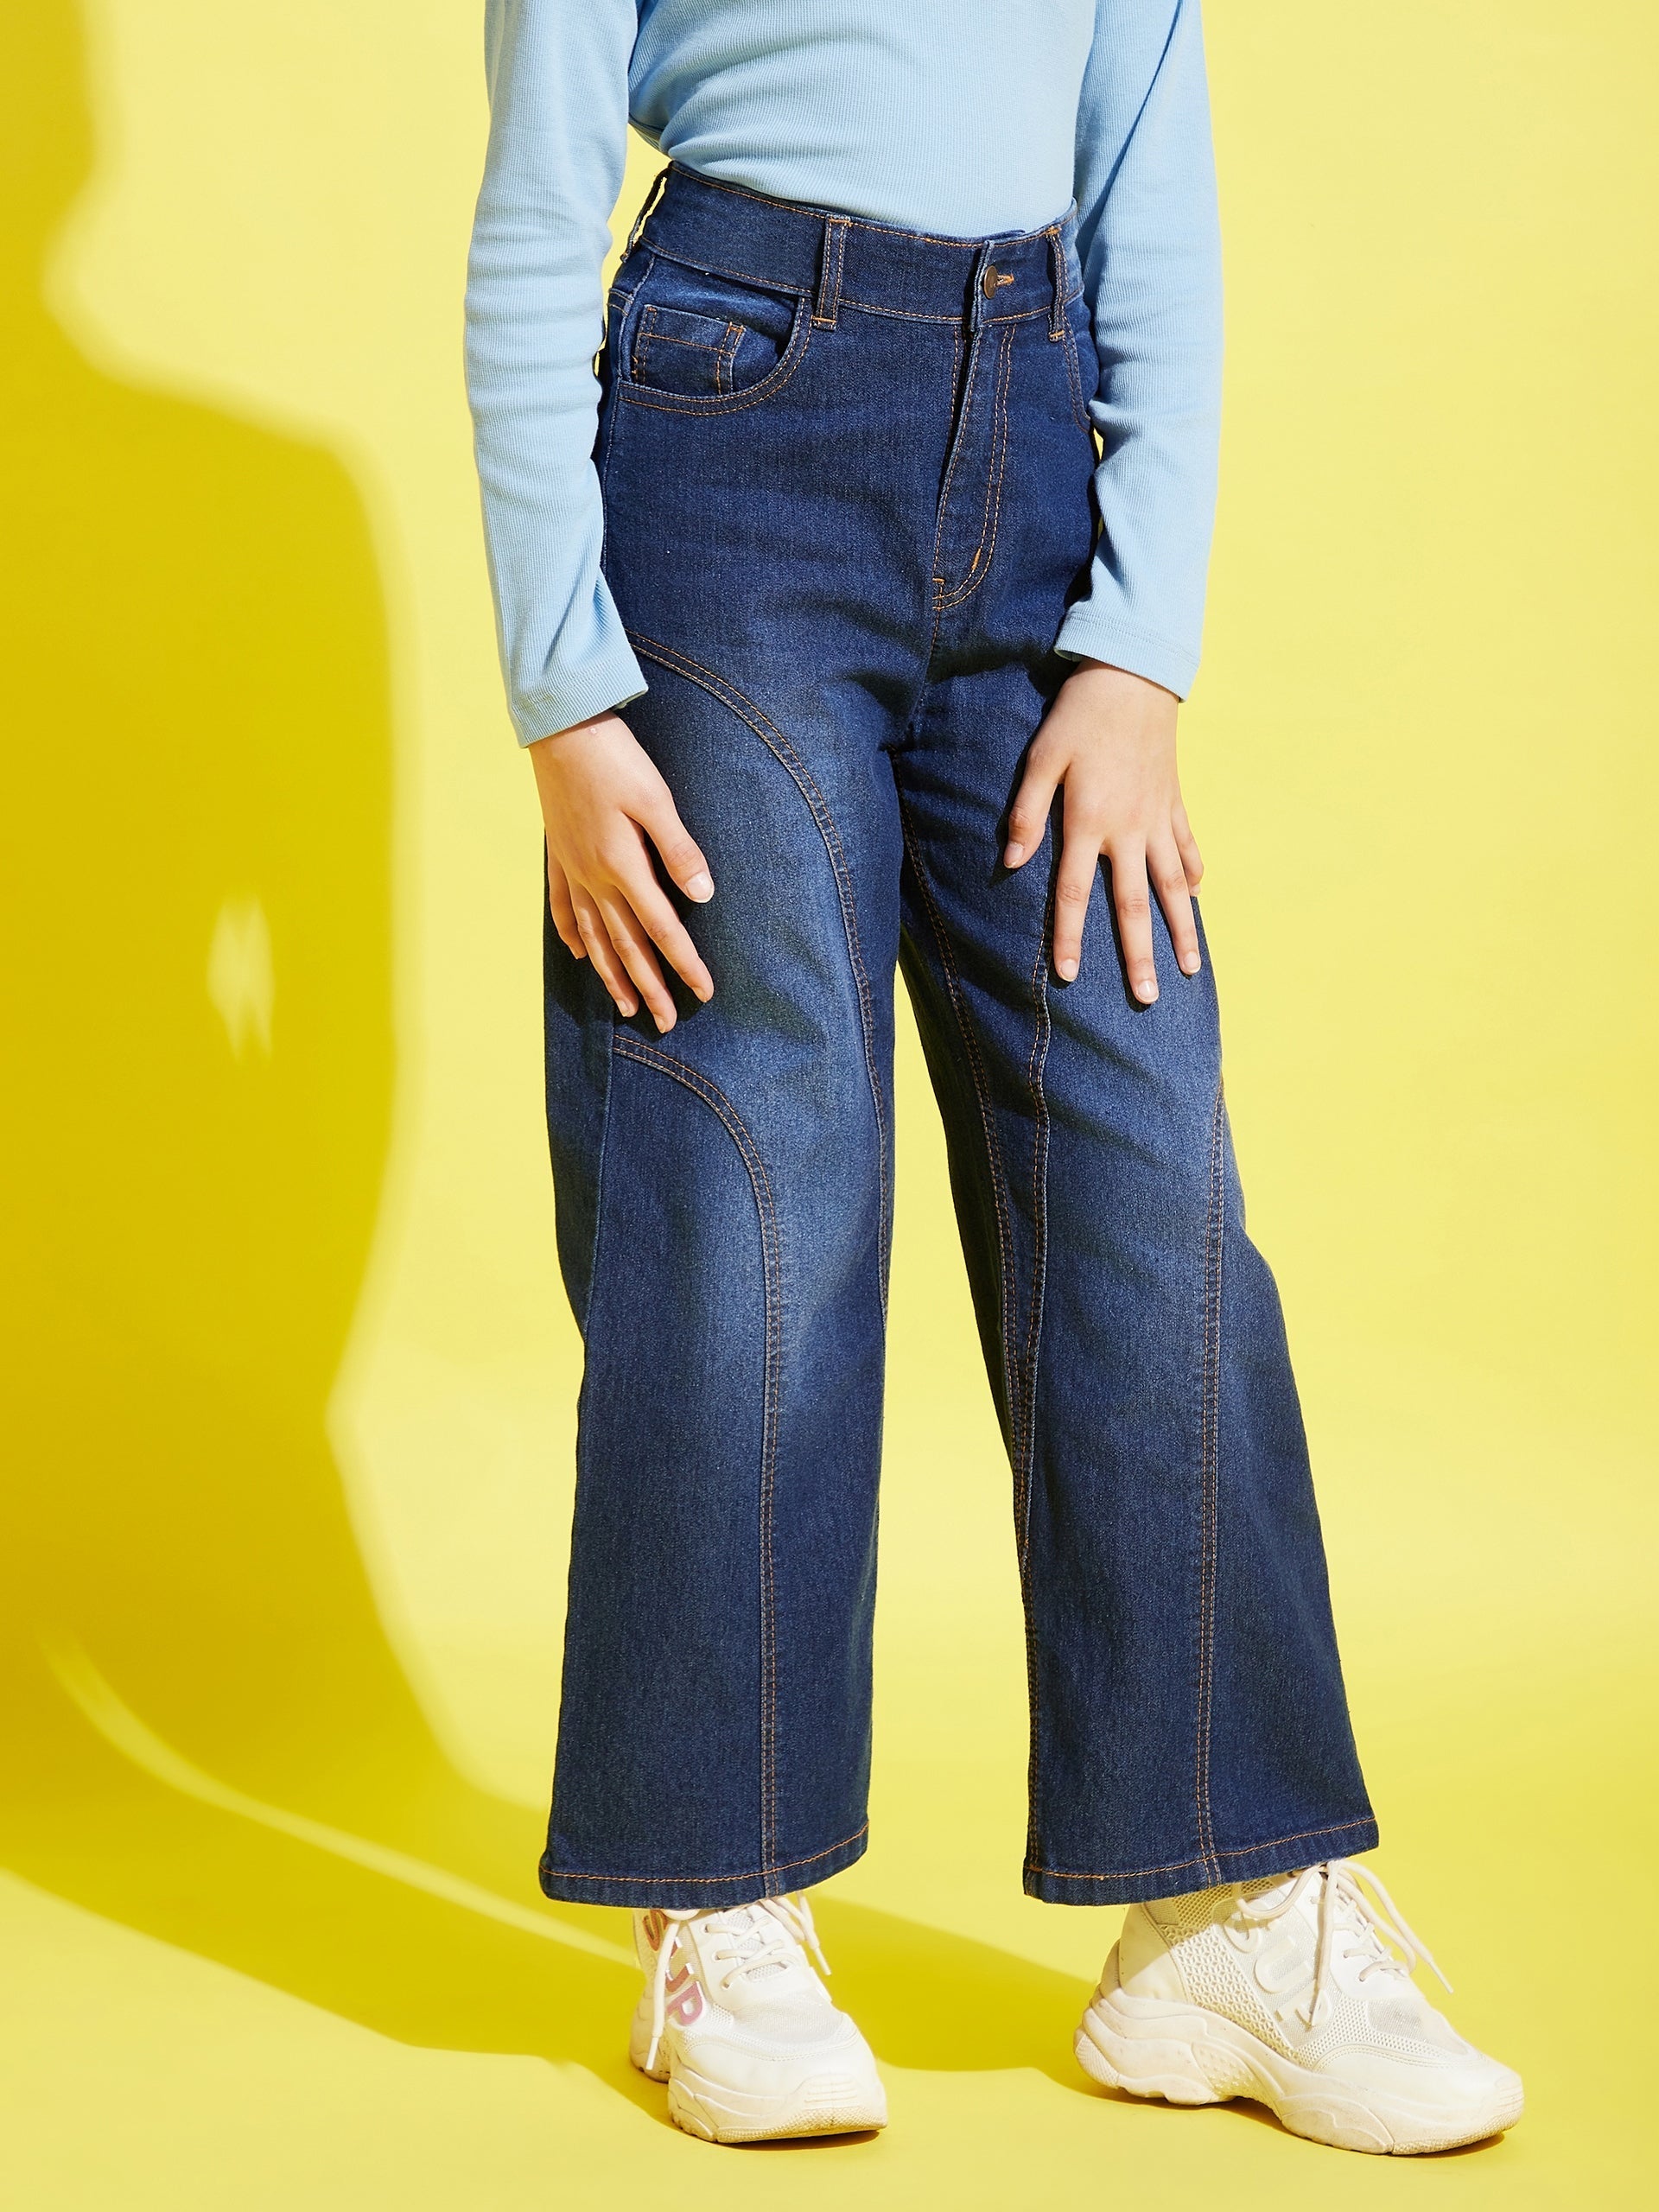 Shop Now Girls Navy Bell Bottom Jeans in Wholesale - Tradyl